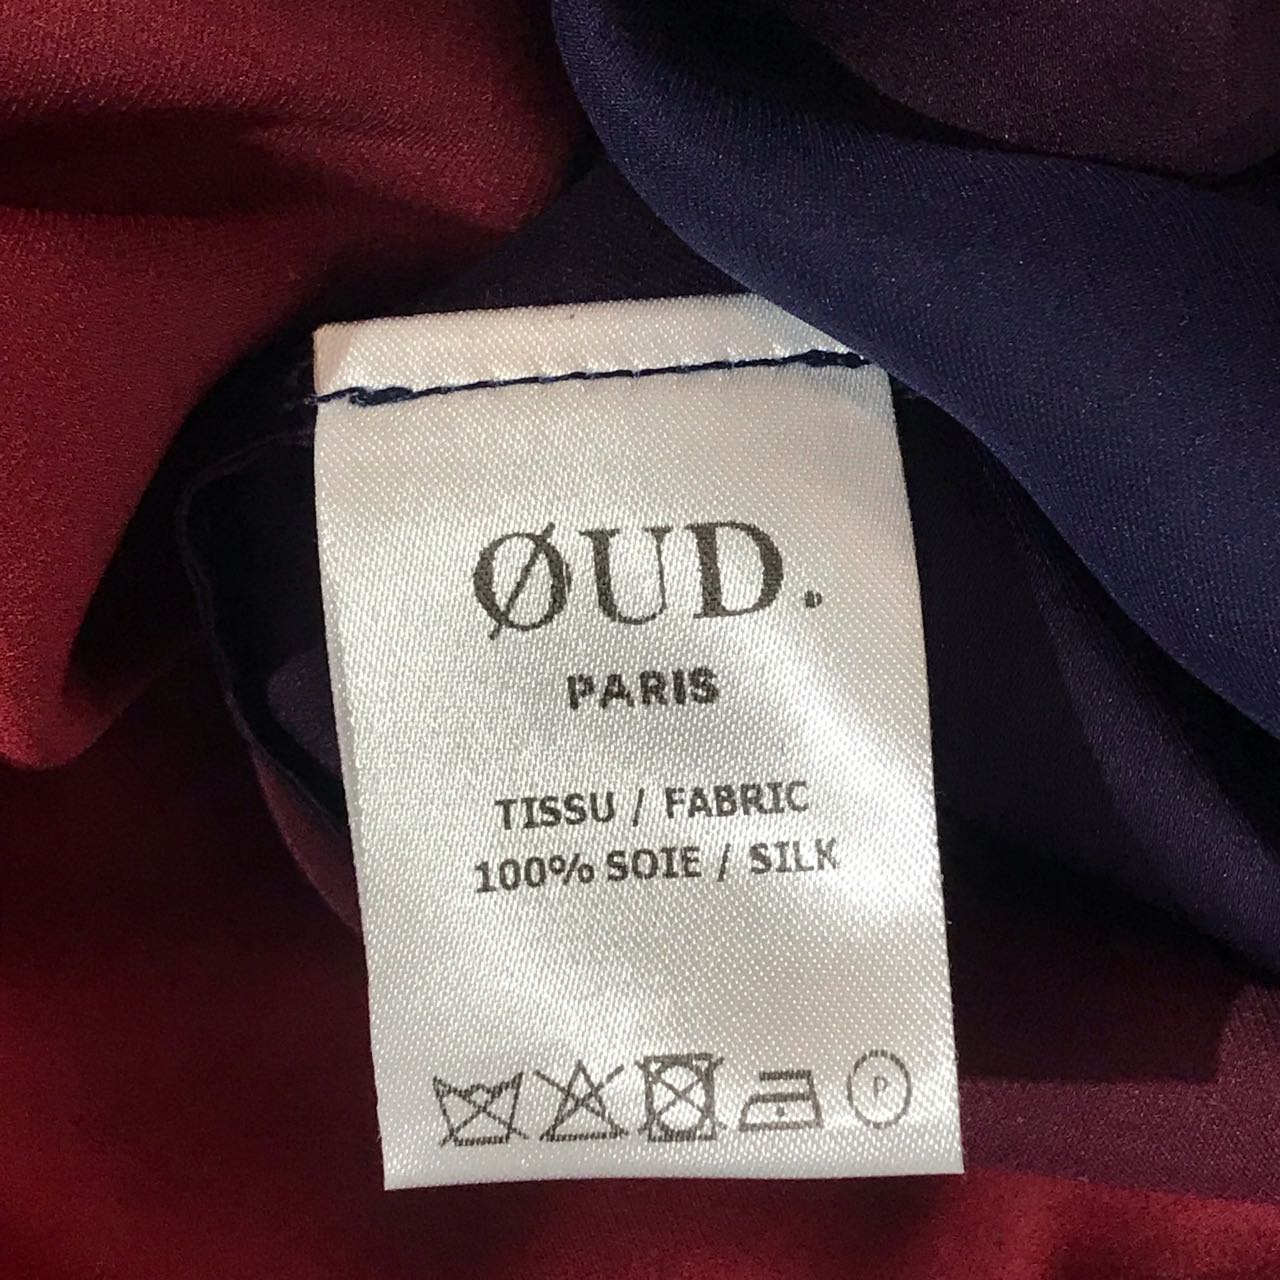 Top Oud rouge T.XS NEUF